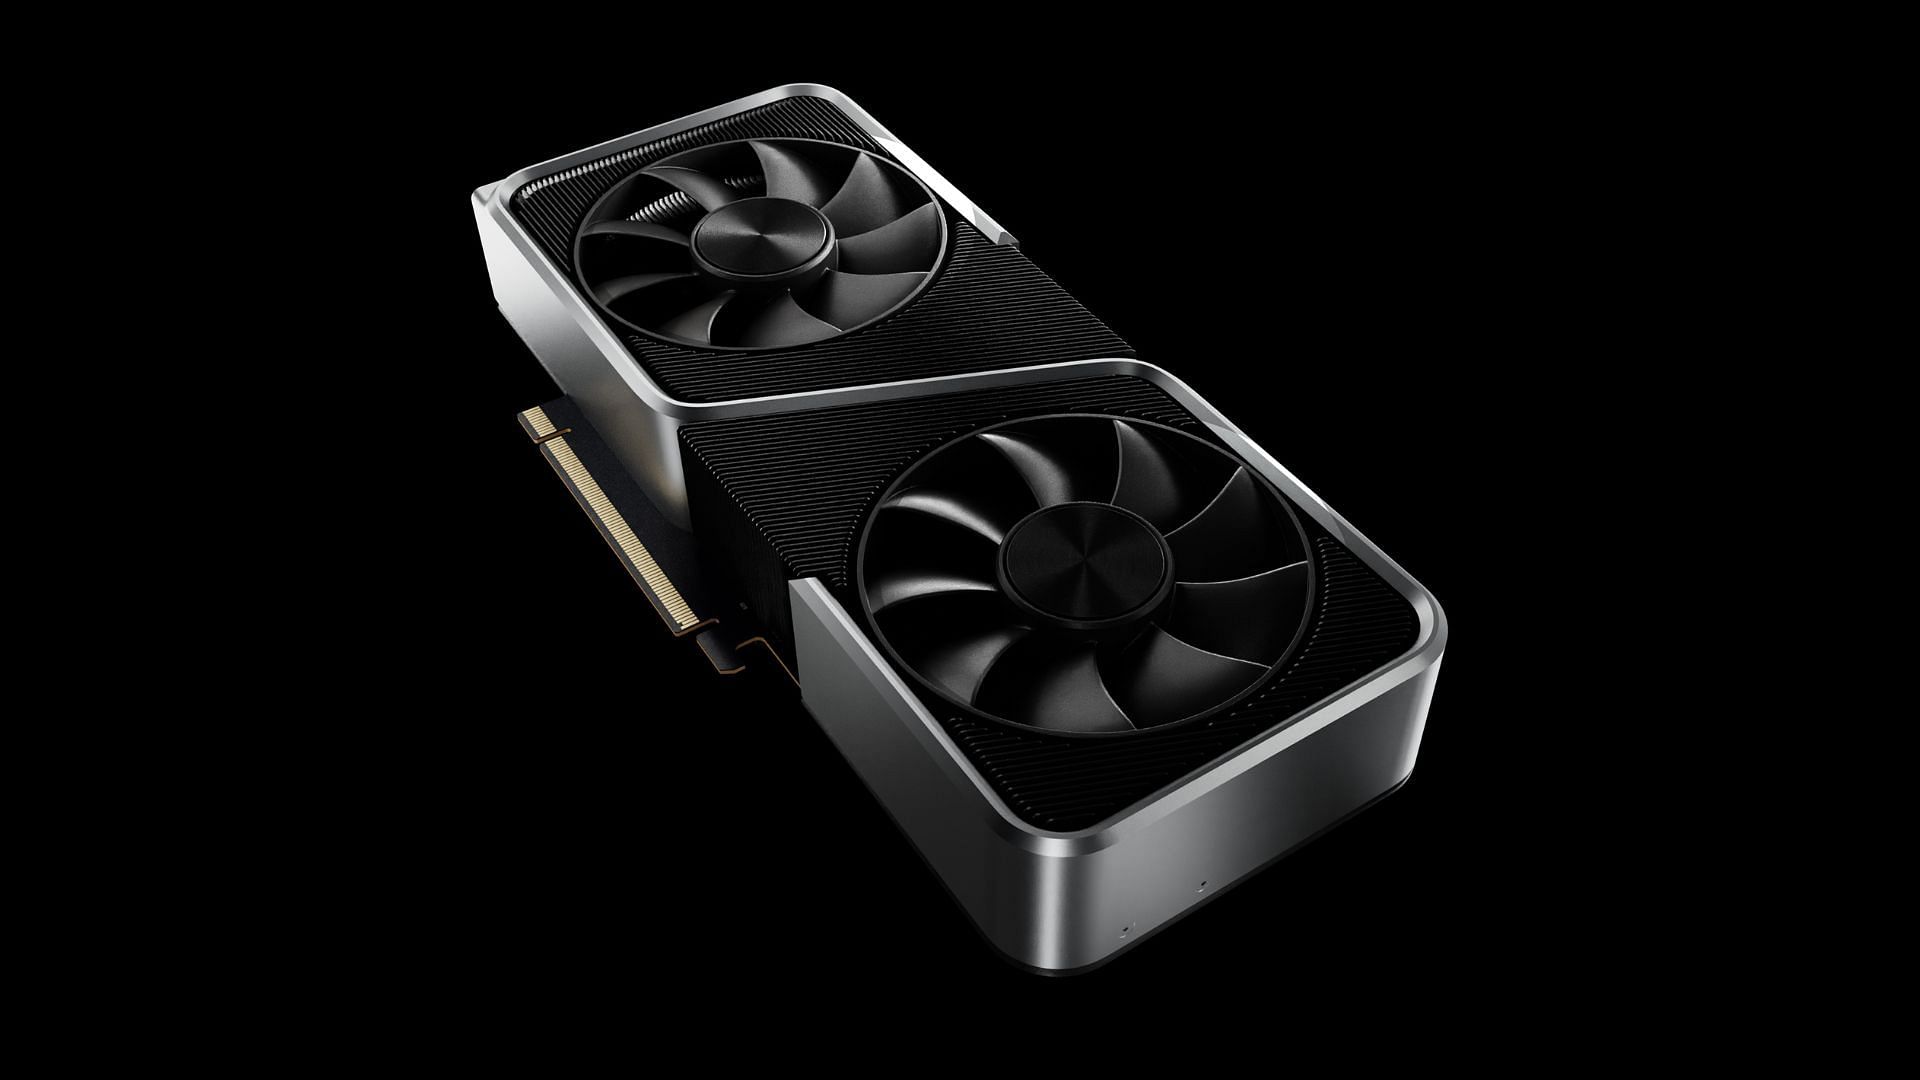 The Nvidia RTX 3060 packs some punch in 1080p gaming (Image via Nvidia)